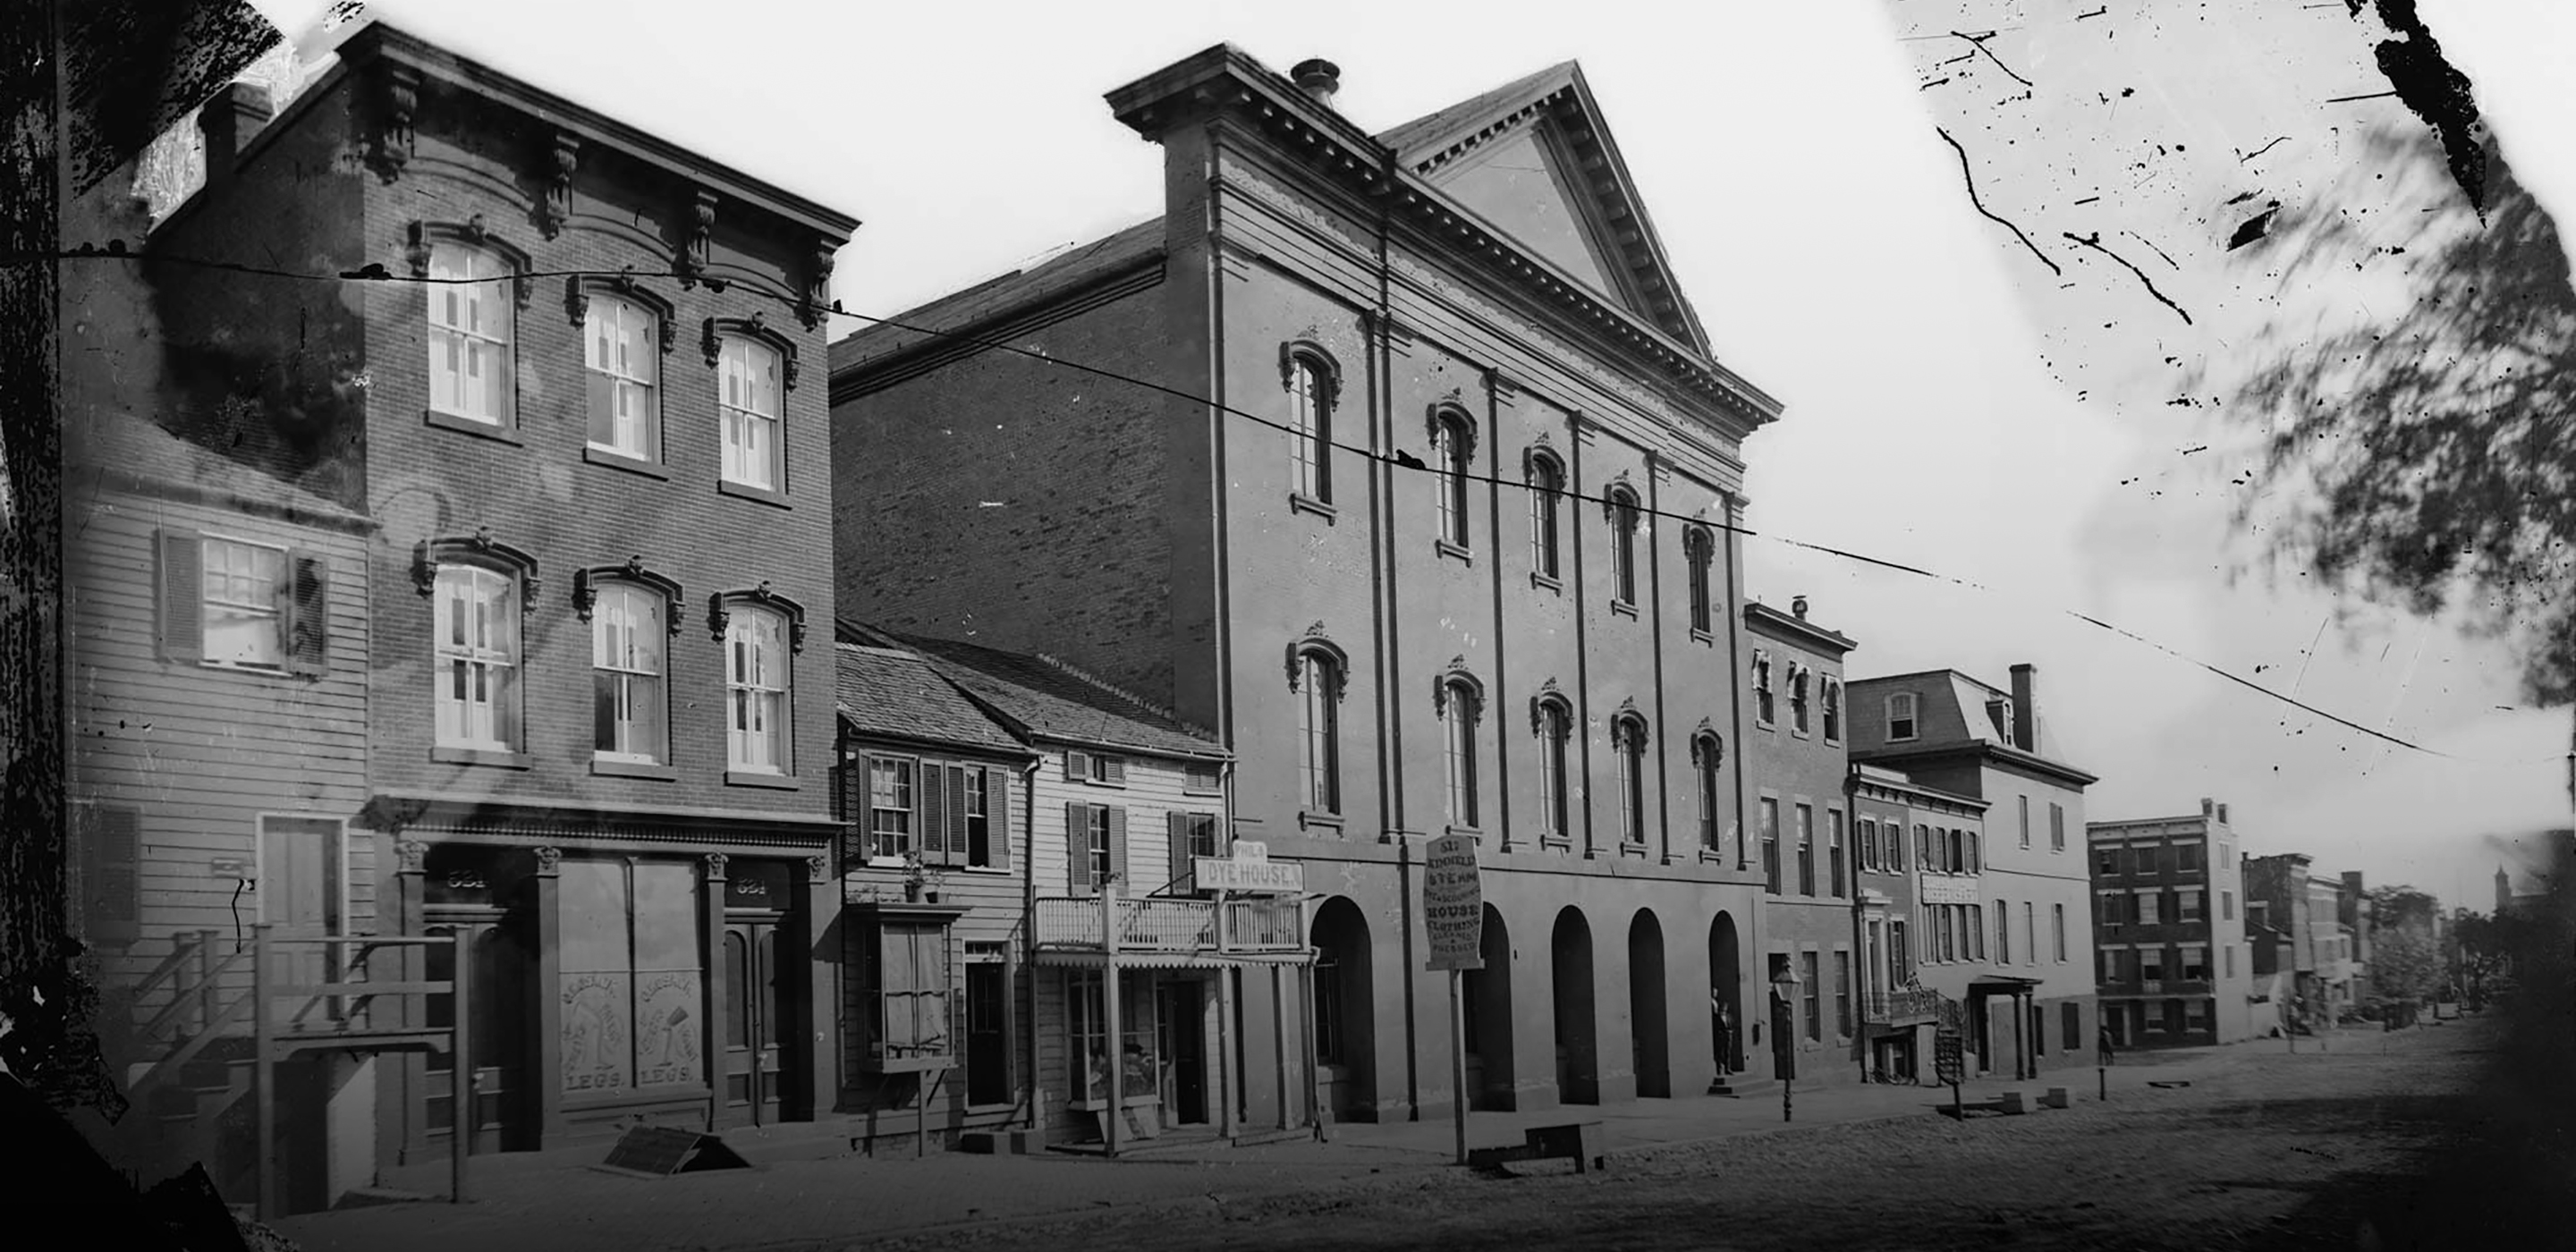 Black and white photograph of the exterior of Ford's Theatre and the rest of 10th street as it looked in the 19th century.